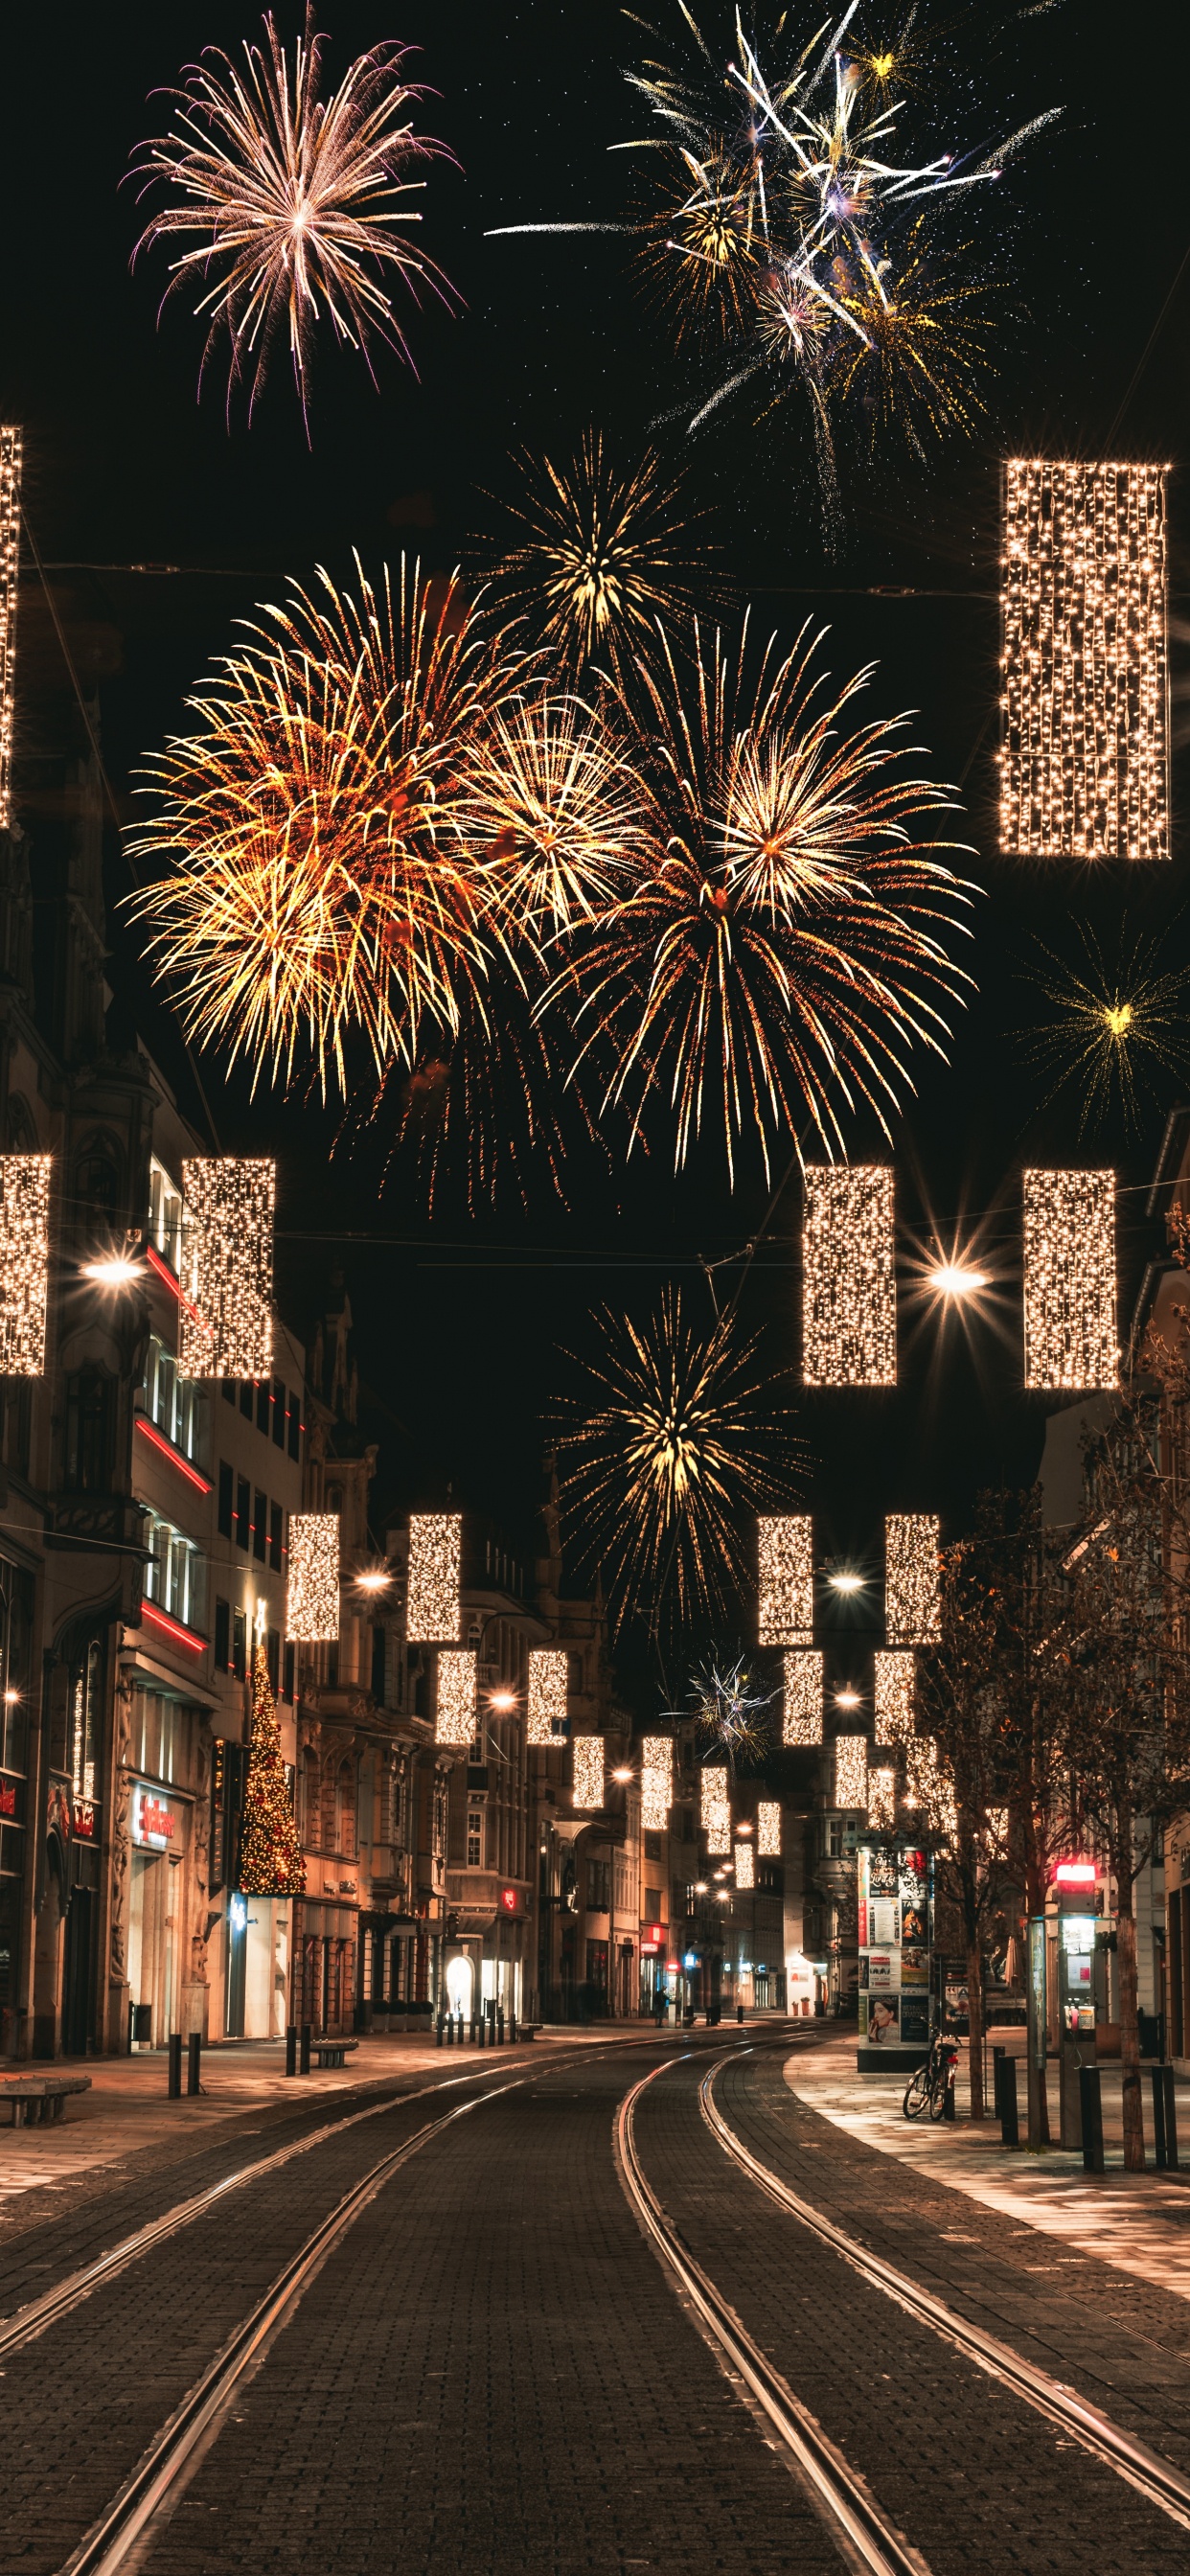 People Walking on Street With Fireworks Display During Night Time. Wallpaper in 1242x2688 Resolution